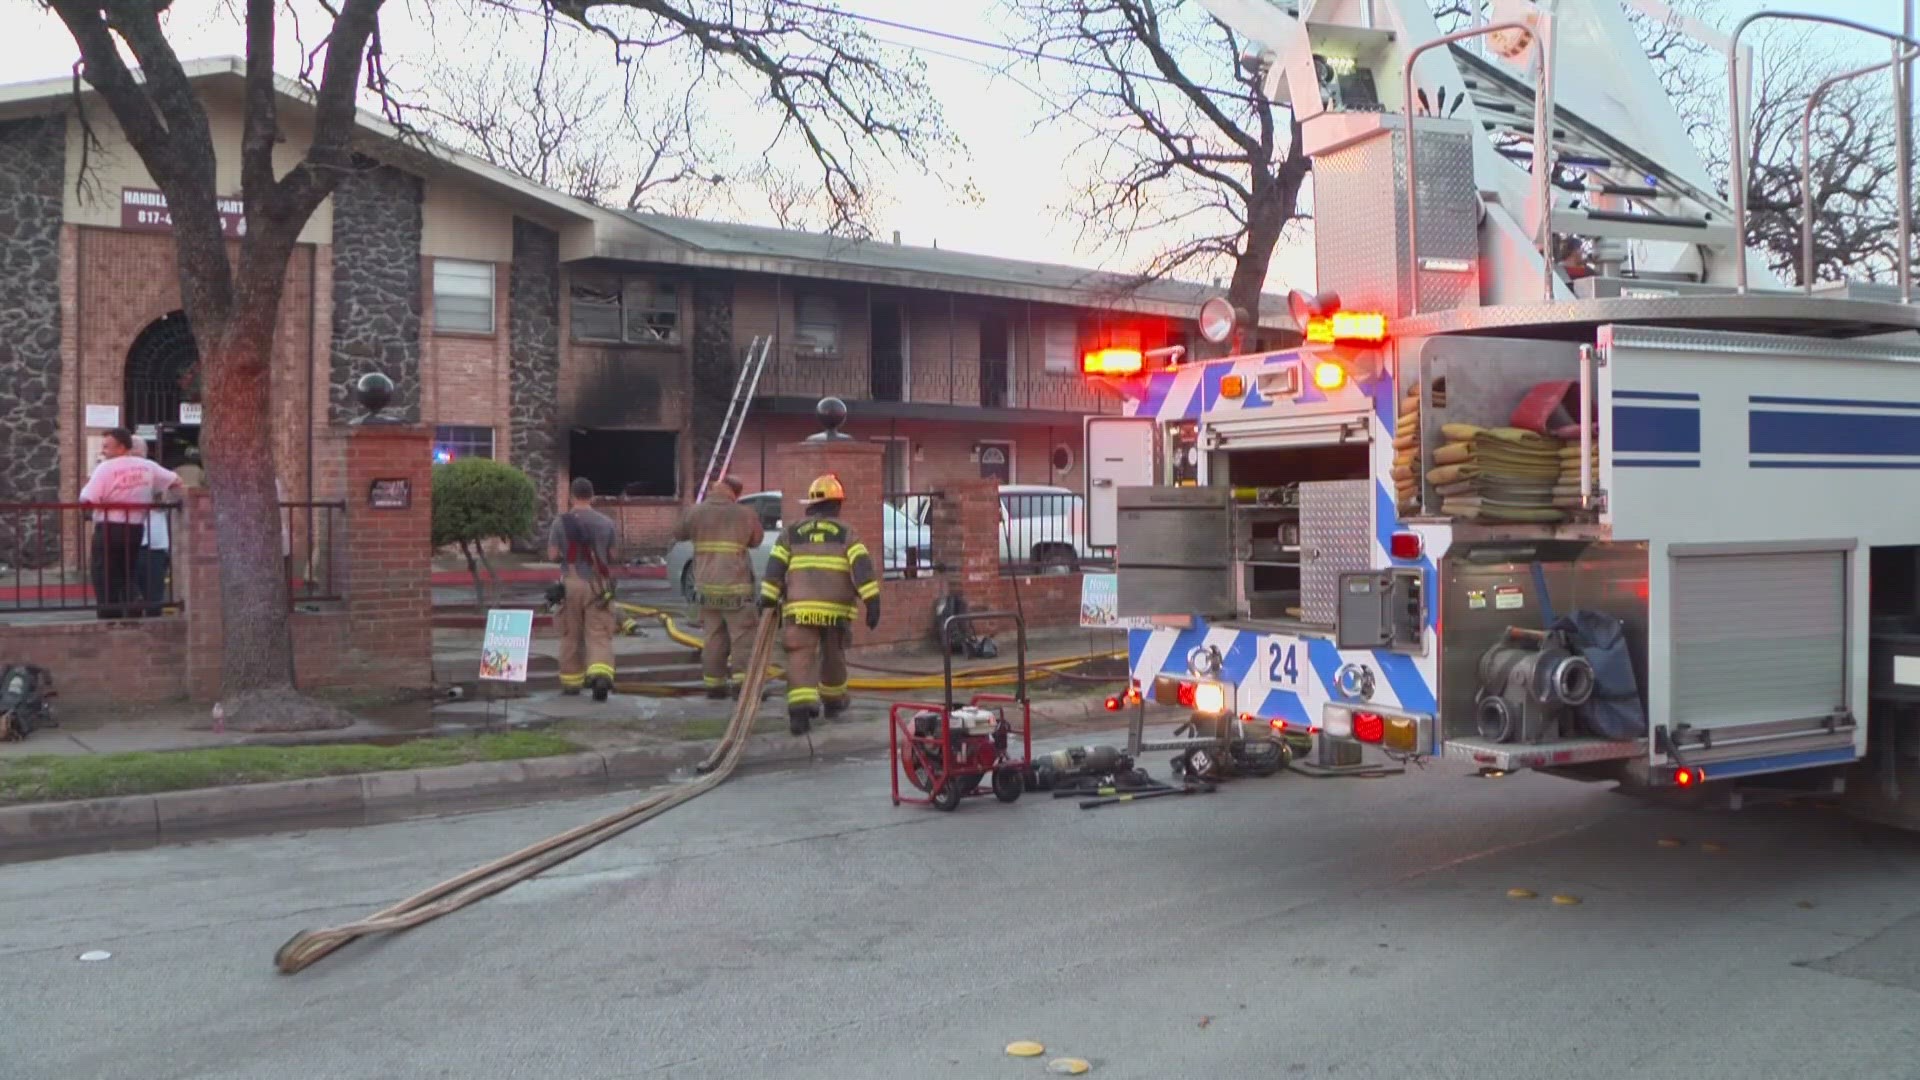 Firefighters responded to an apartment building in Southeast Fort Worth shortly after 6:15 p.m. Thursday.